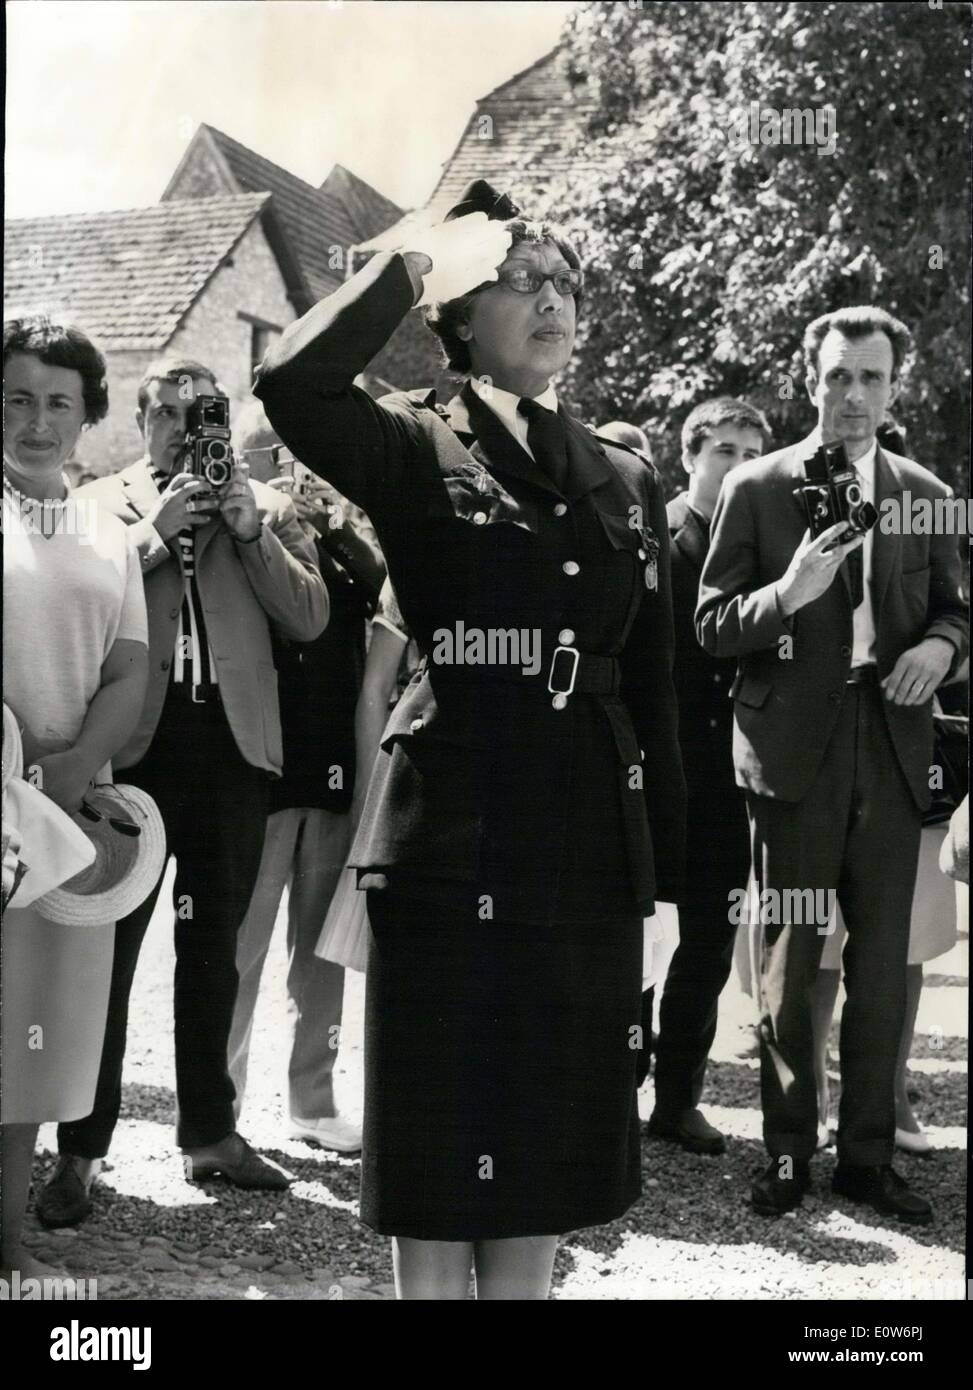 Aug. 19, 1961 - The award is given to her by General Vallin for her help in the resistance. Stock Photo